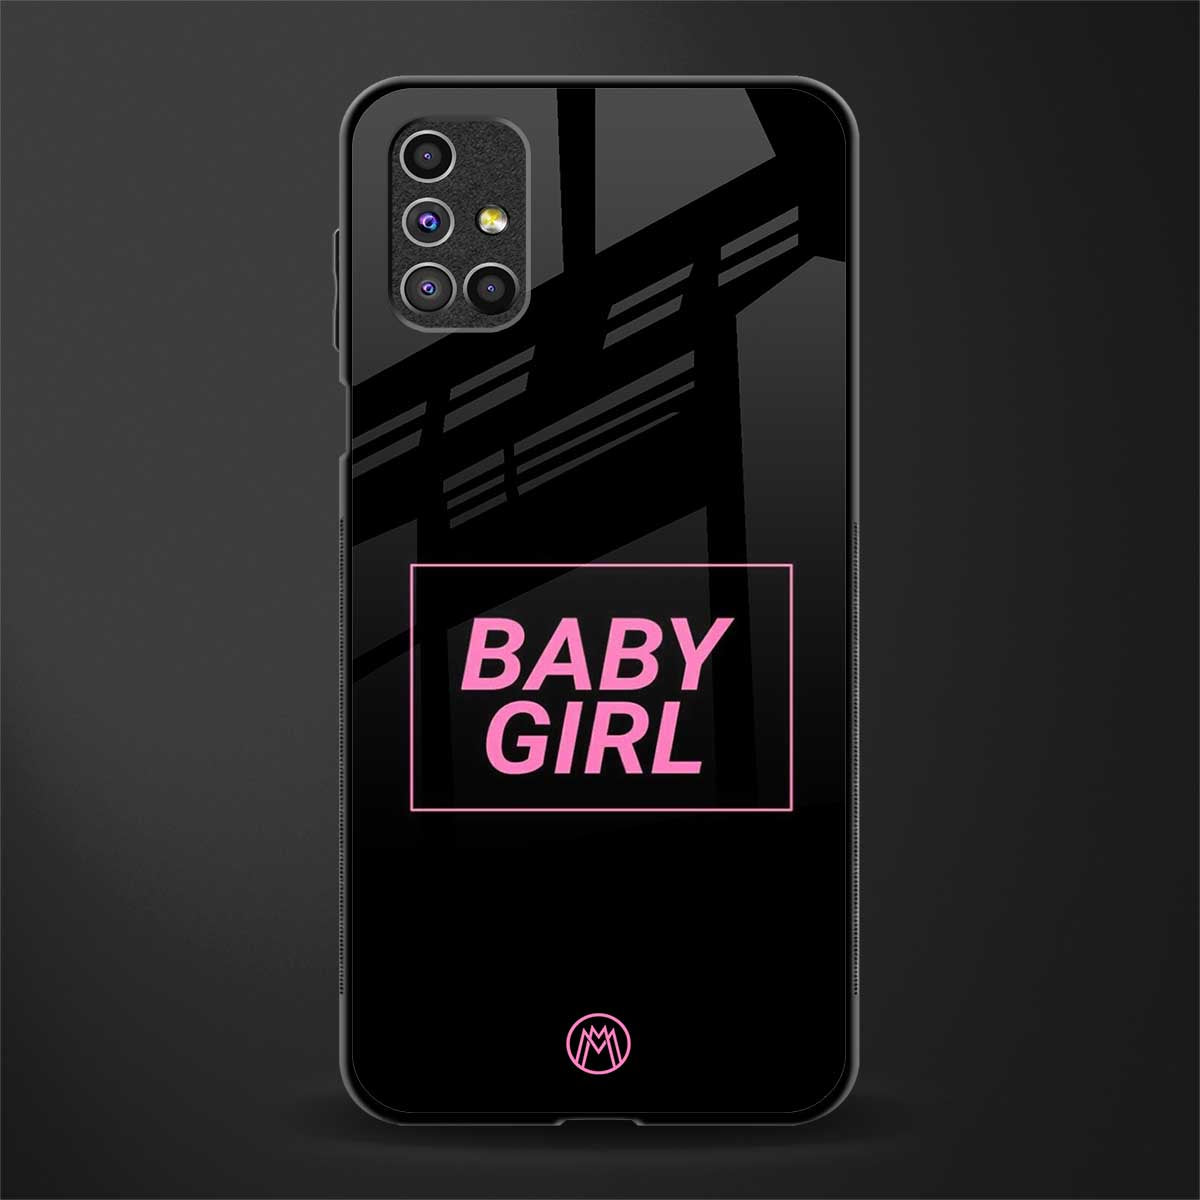 baby girl glass case for samsung galaxy m31s image